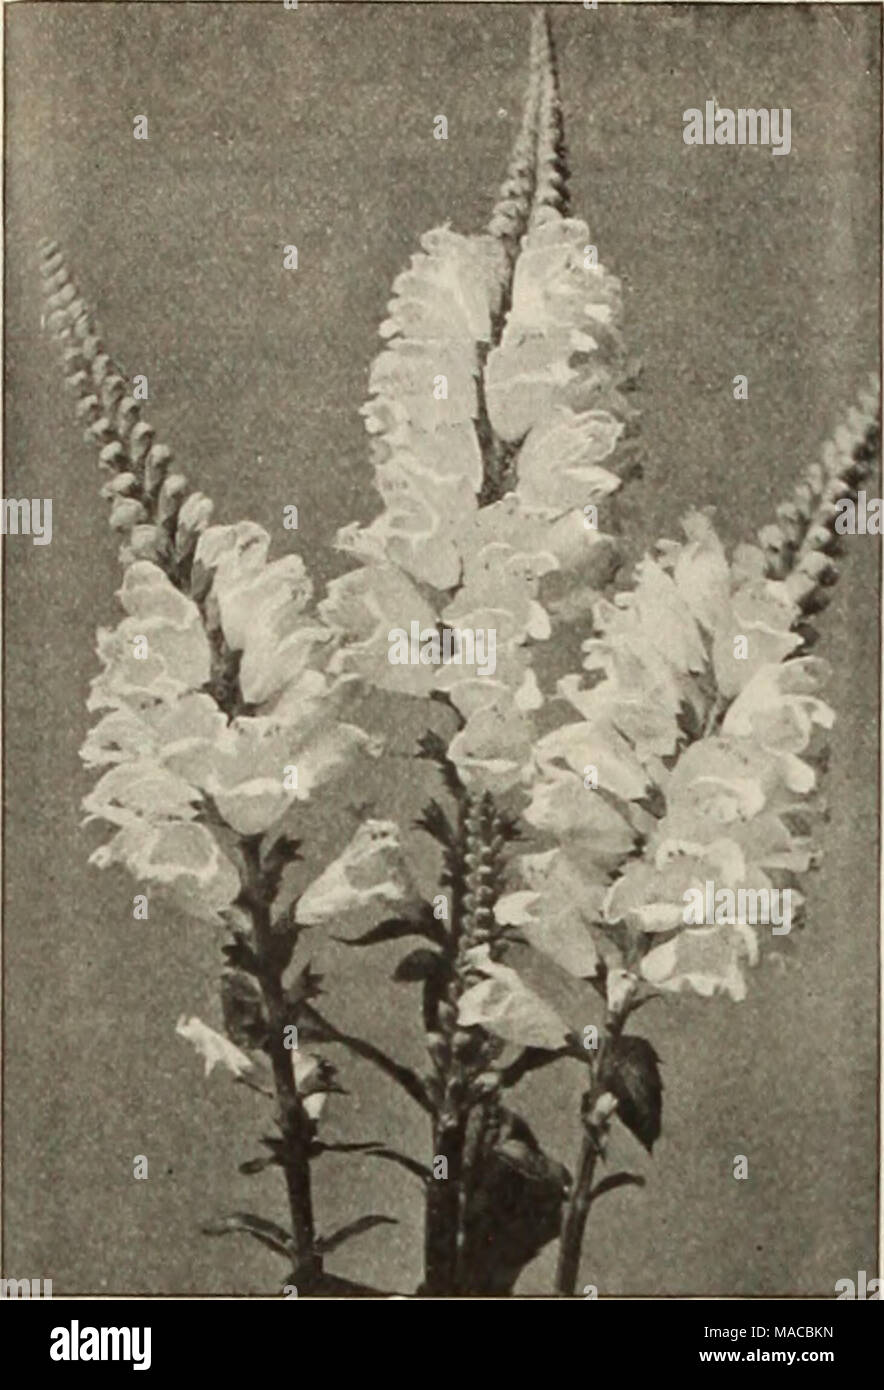 . Dreer's wholesale price list : bulbs for florists plants for florists flower seeds for florists fungicides, fertilizers, insecticides, implements, etc . PHYSOSTEGIA Pseonies, Early Flowering. Perdoz. Per too Officinalis (Mutabilis) Alba. Blush white tl 50 $10 00 Rosea. Soft bright pink . 1 50 10 00 Rubra. Crimson 100 700 Tenulfolla flore plena. Crimson 3 00 20 00 Double White Pink All Colors Mixed PfEonles In Mixture, perdoz. lOO looo I085t6 00t5000 858004000 855003500 Tree Paeonies. We offer a collection of 12 distinct varieties: strong. 3-year-old plants. 75 cents each; $8.00 per dozen. Ea Stock Photo